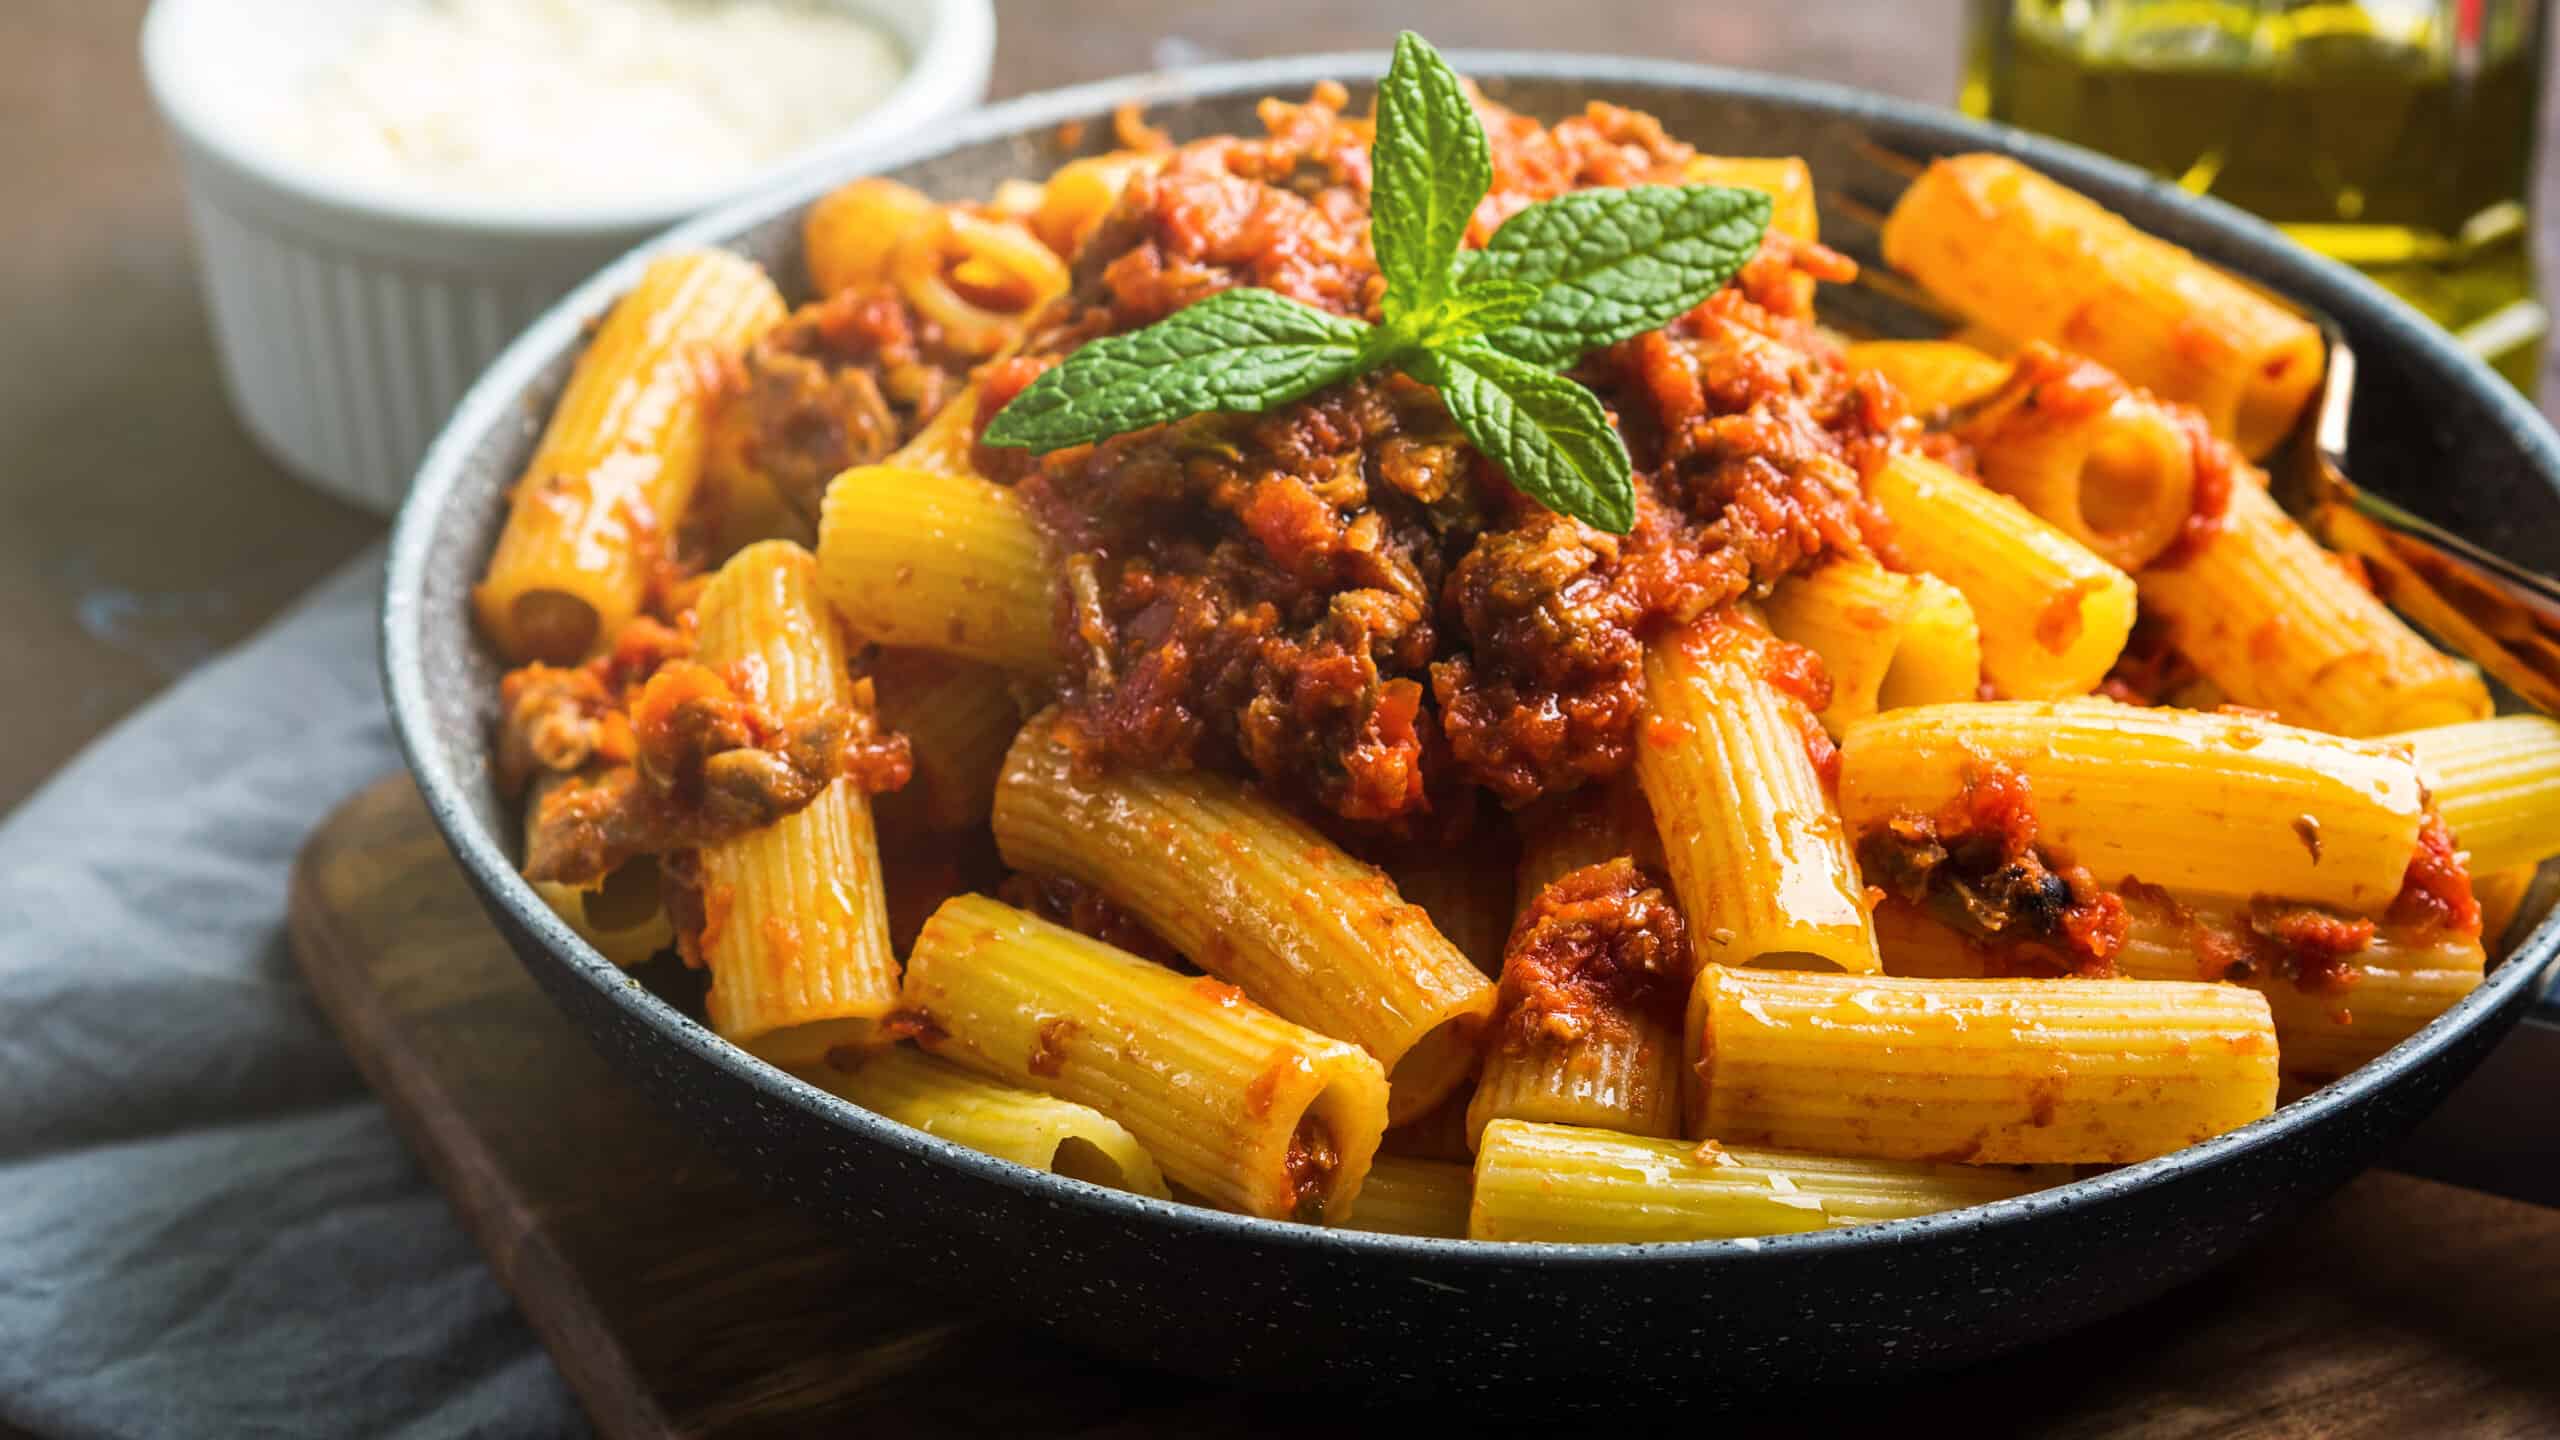 Delicious rigatoni pasta with Italian tomato meat ragu sauce served in a pan on dark brown background. Traditional pasta dish concept. Home made lunch